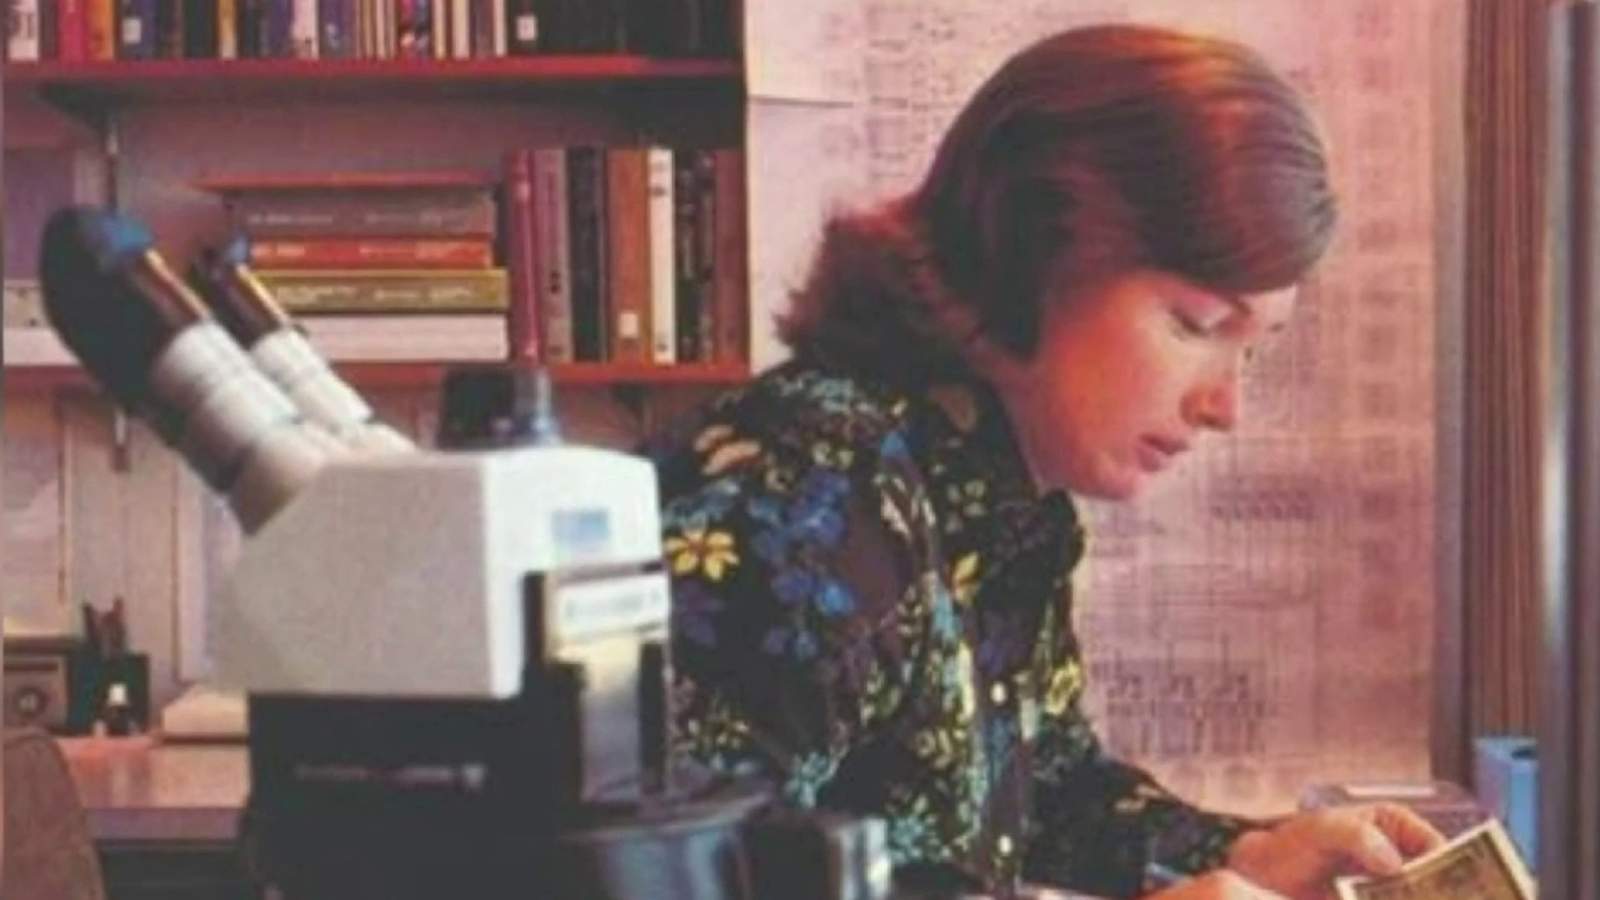 52 years later: IBM apologizes for firing tech pioneer, former UM professor for coming out as trans